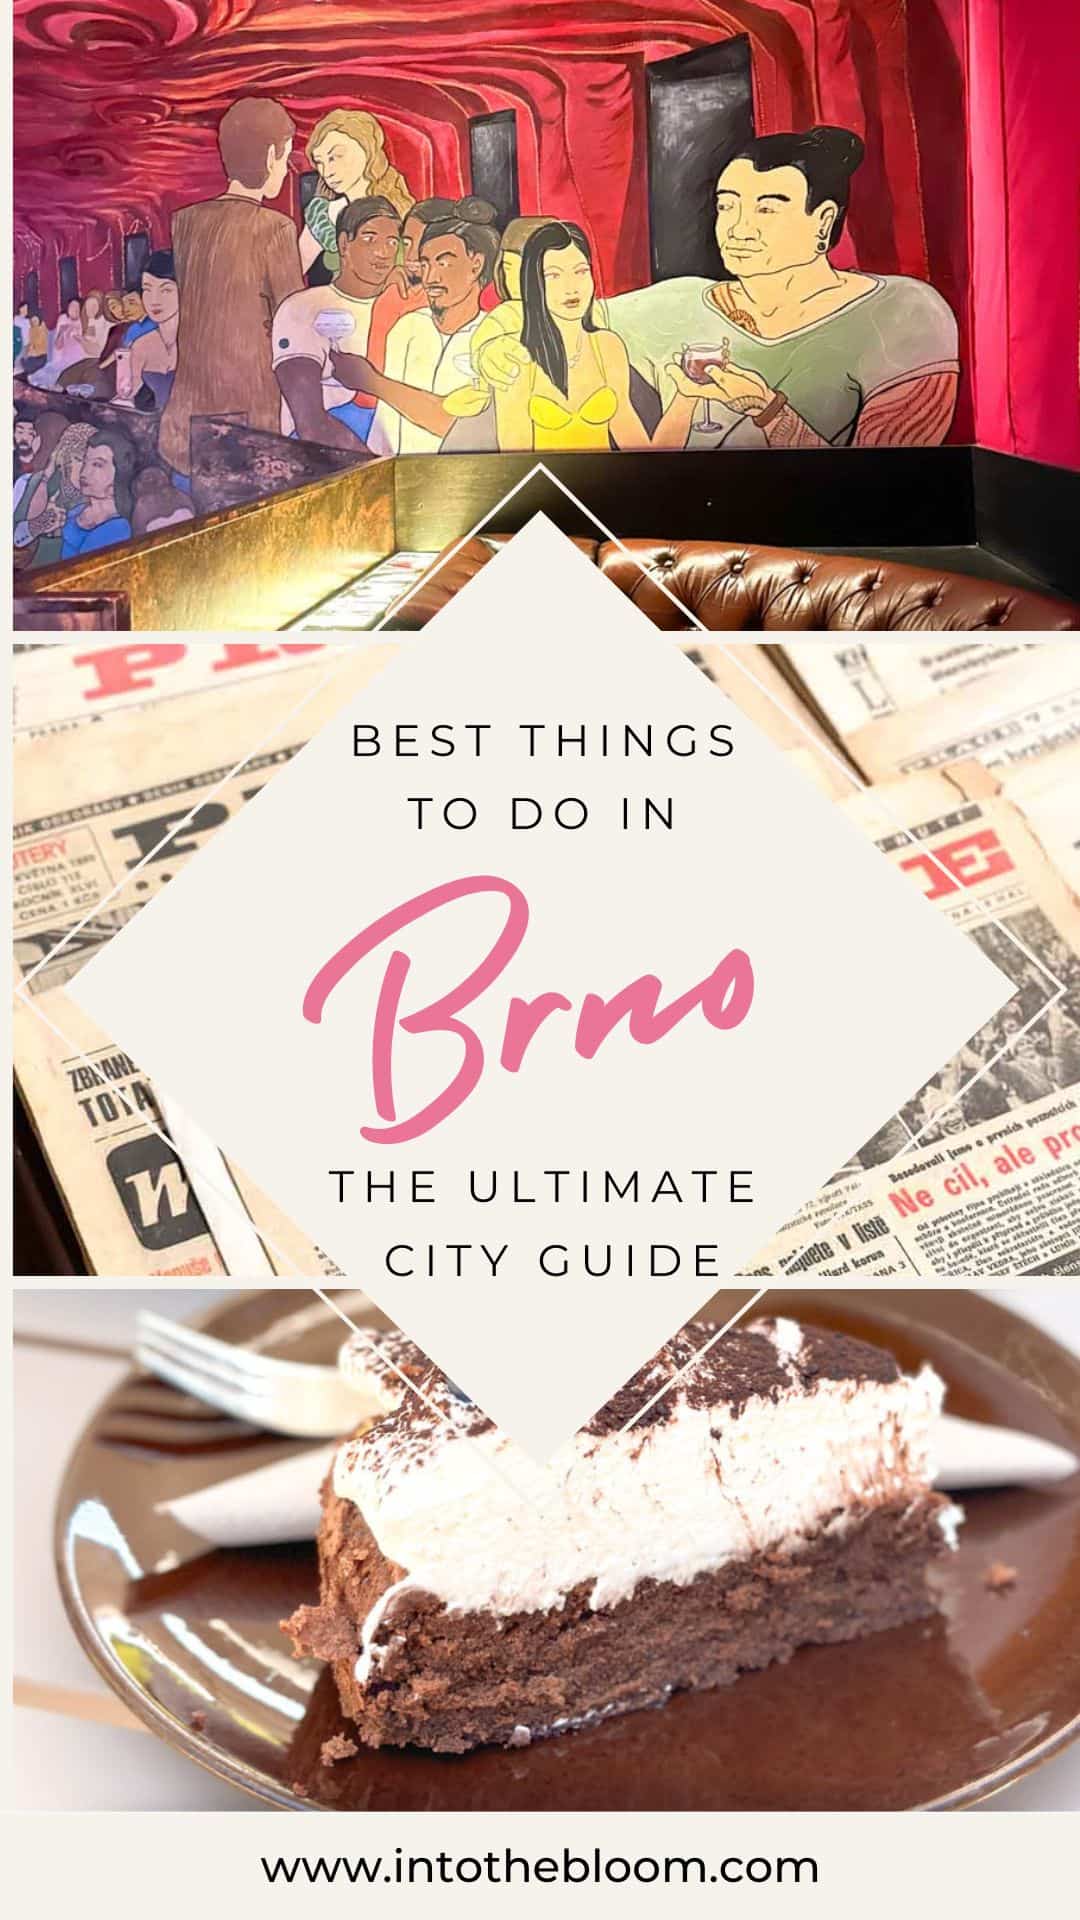 Best things to do in Brno - Brno travel guide